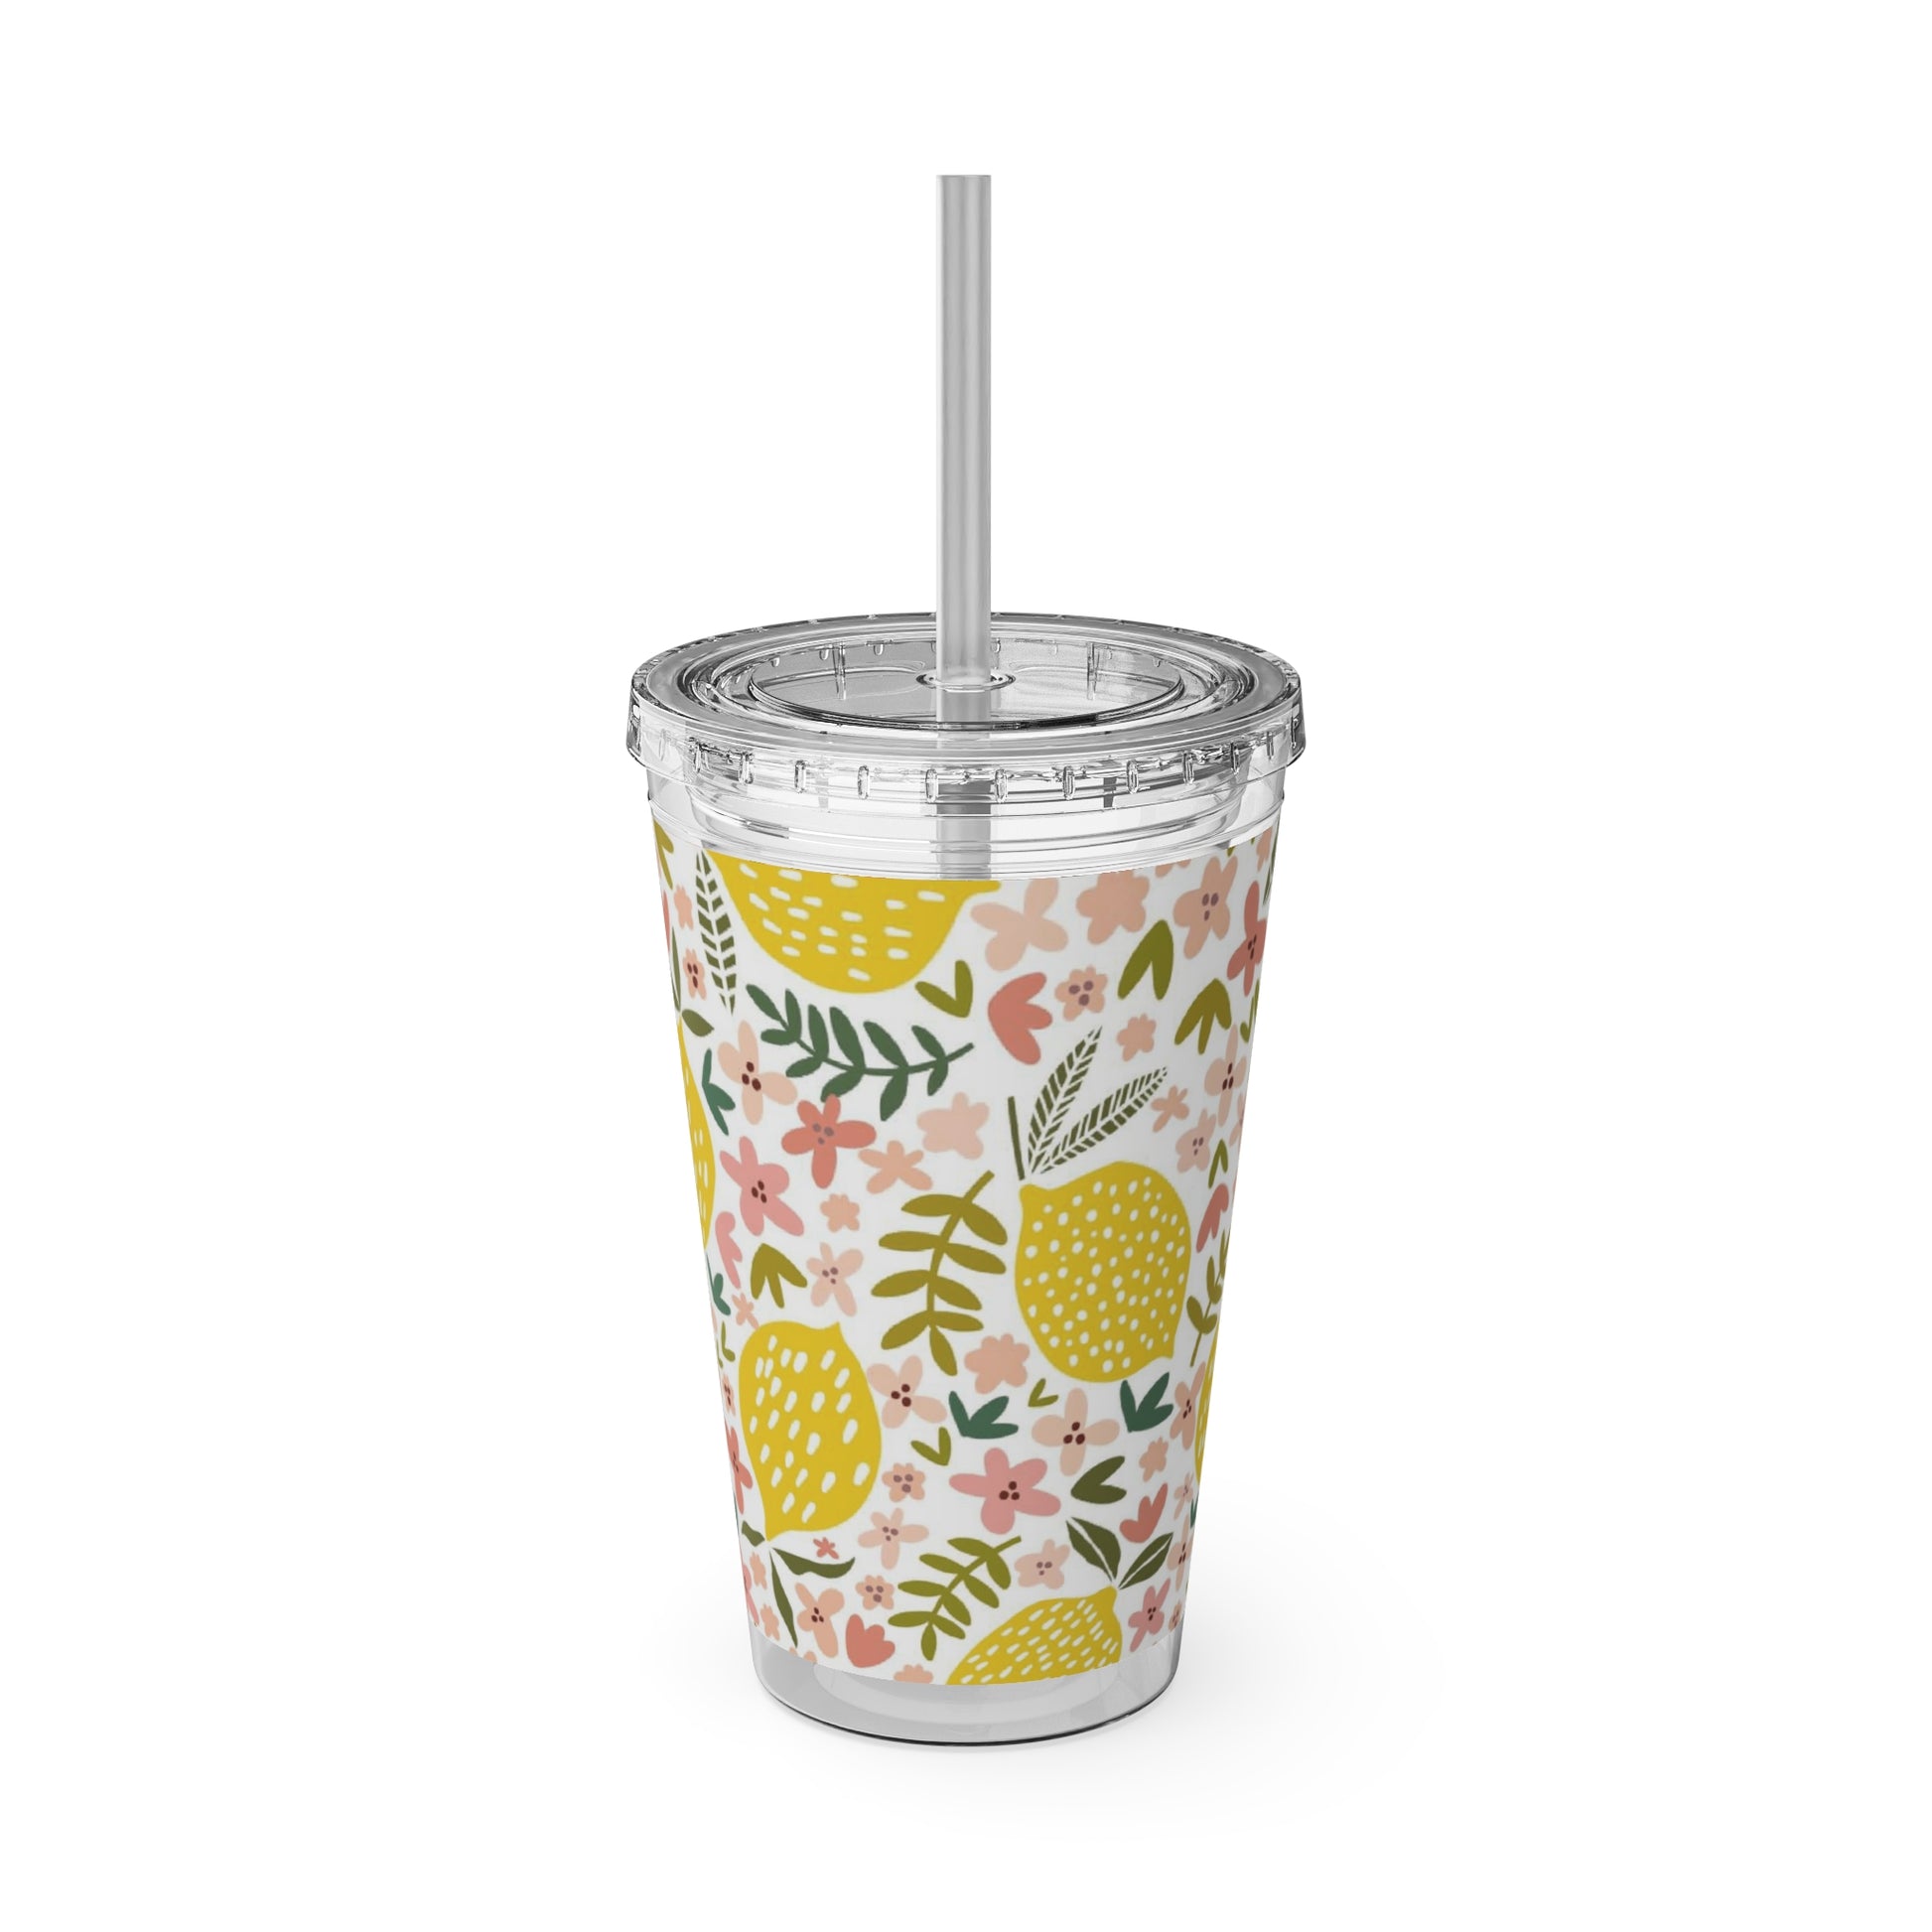 A Printify Pink Lemons Tumbler: 16 oz.; Lid & Straw; Acrylic; BPA-free with a floral pattern and a straw.